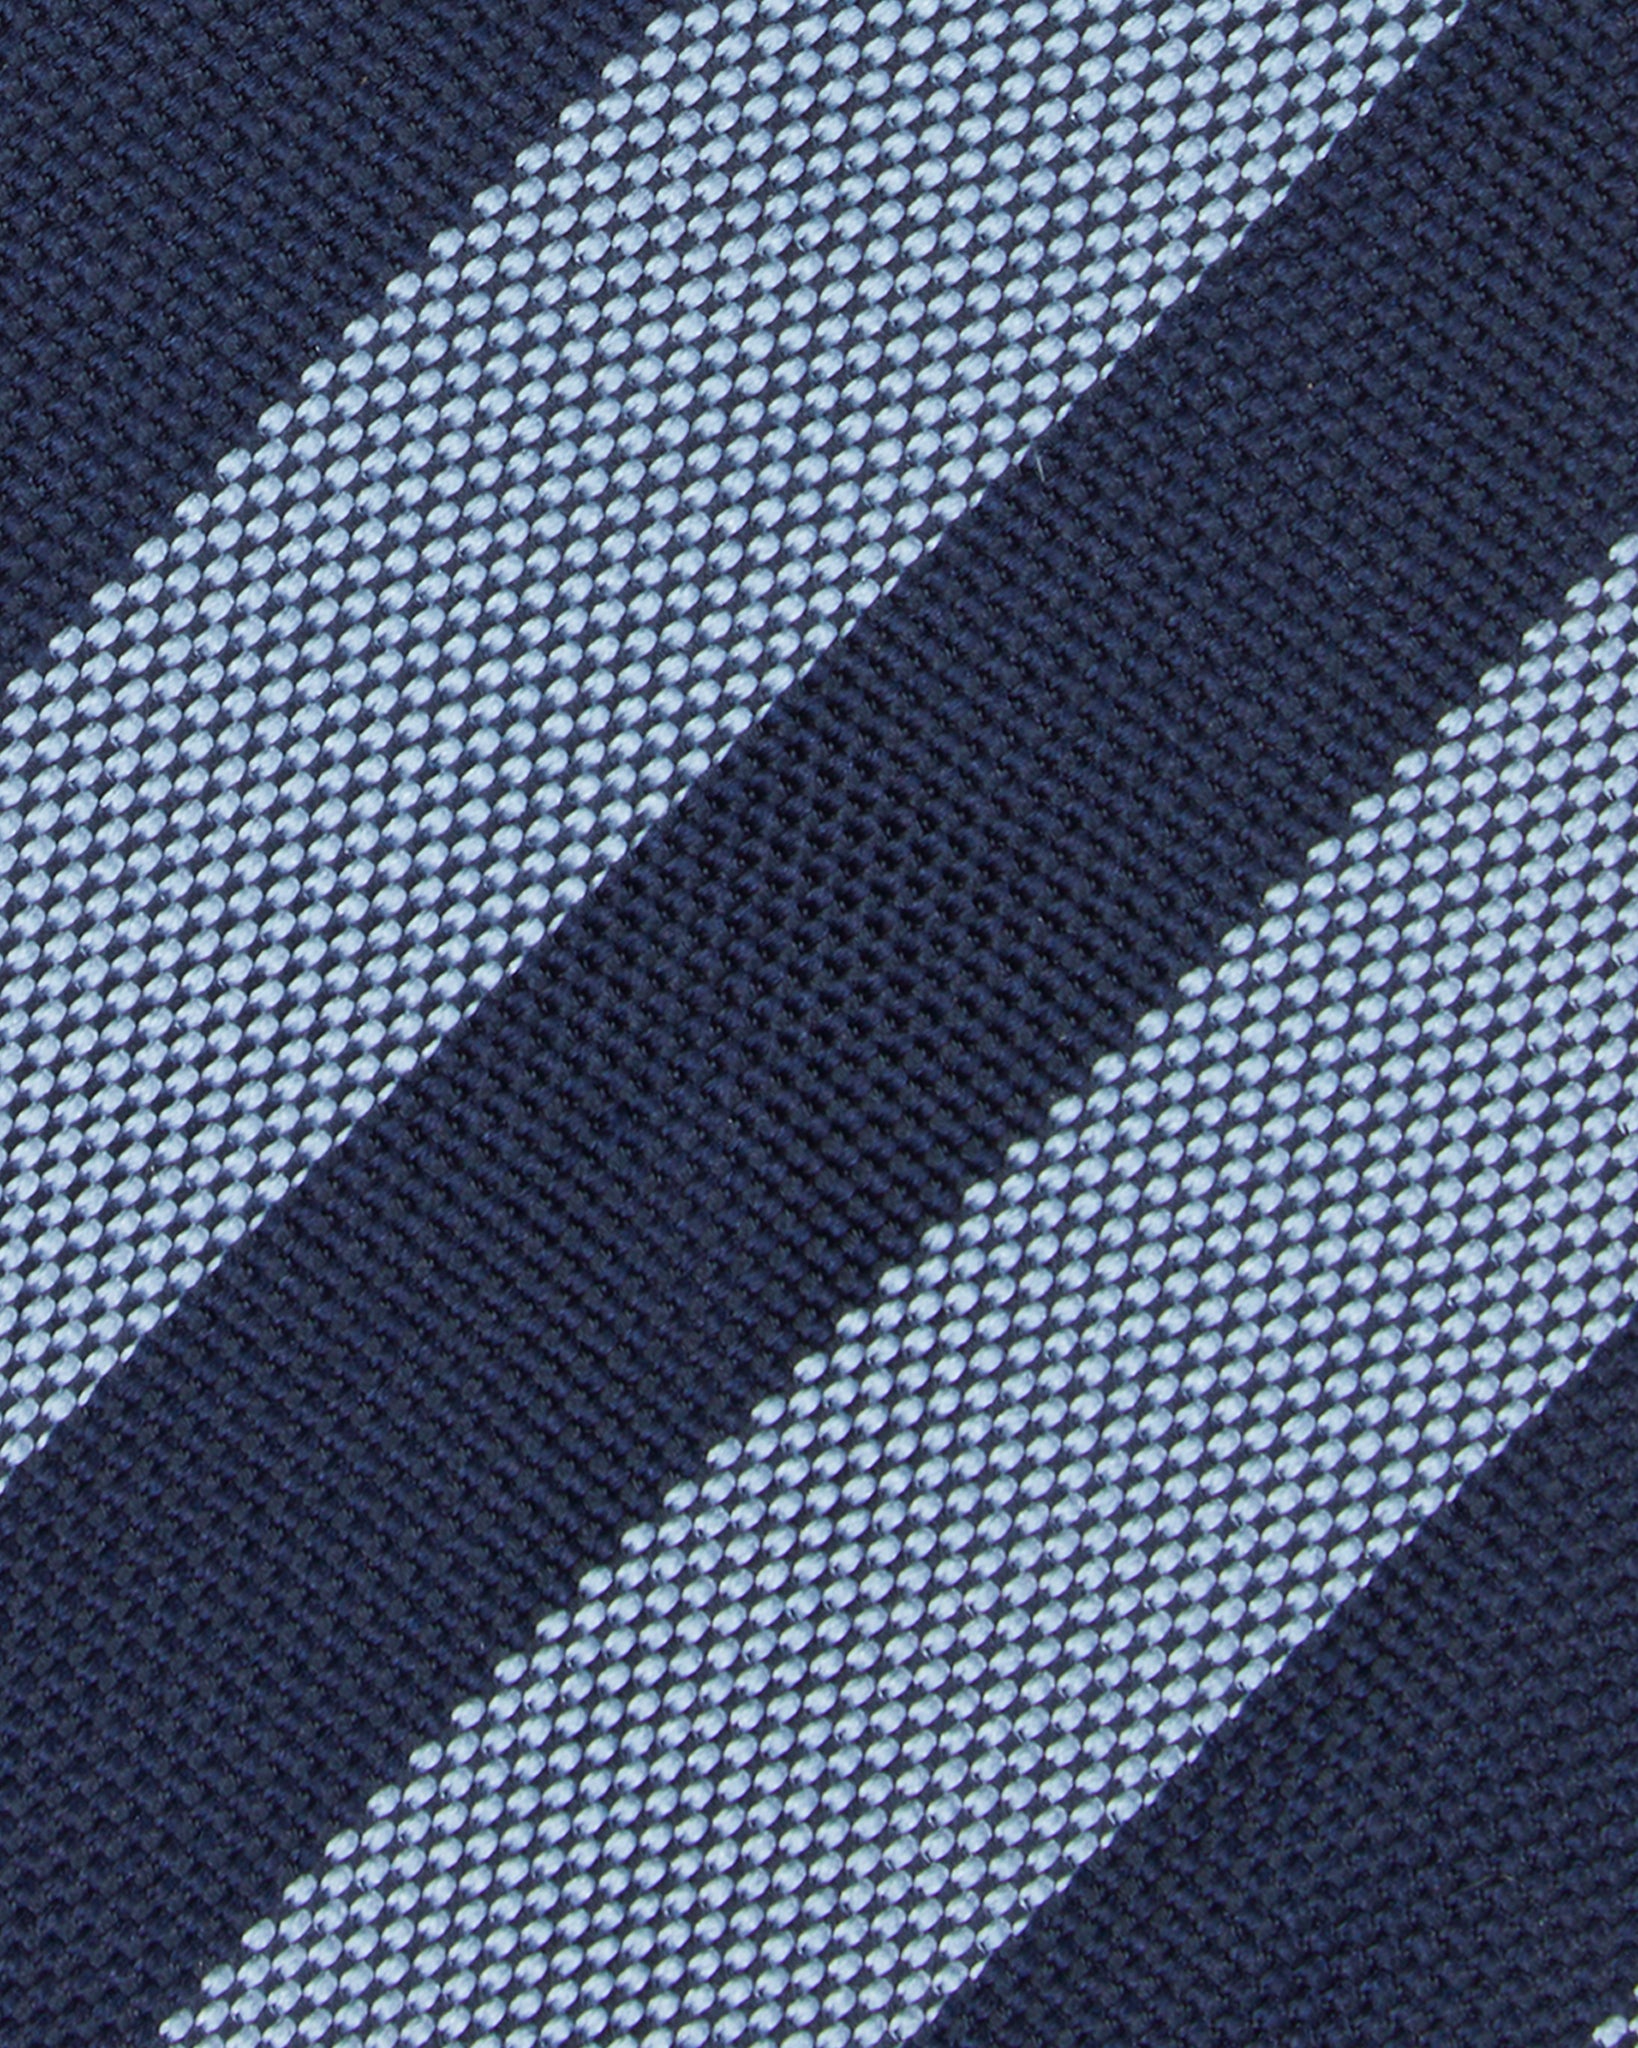 Silk Woven Tie in Navy/French Blue Awning Stripe